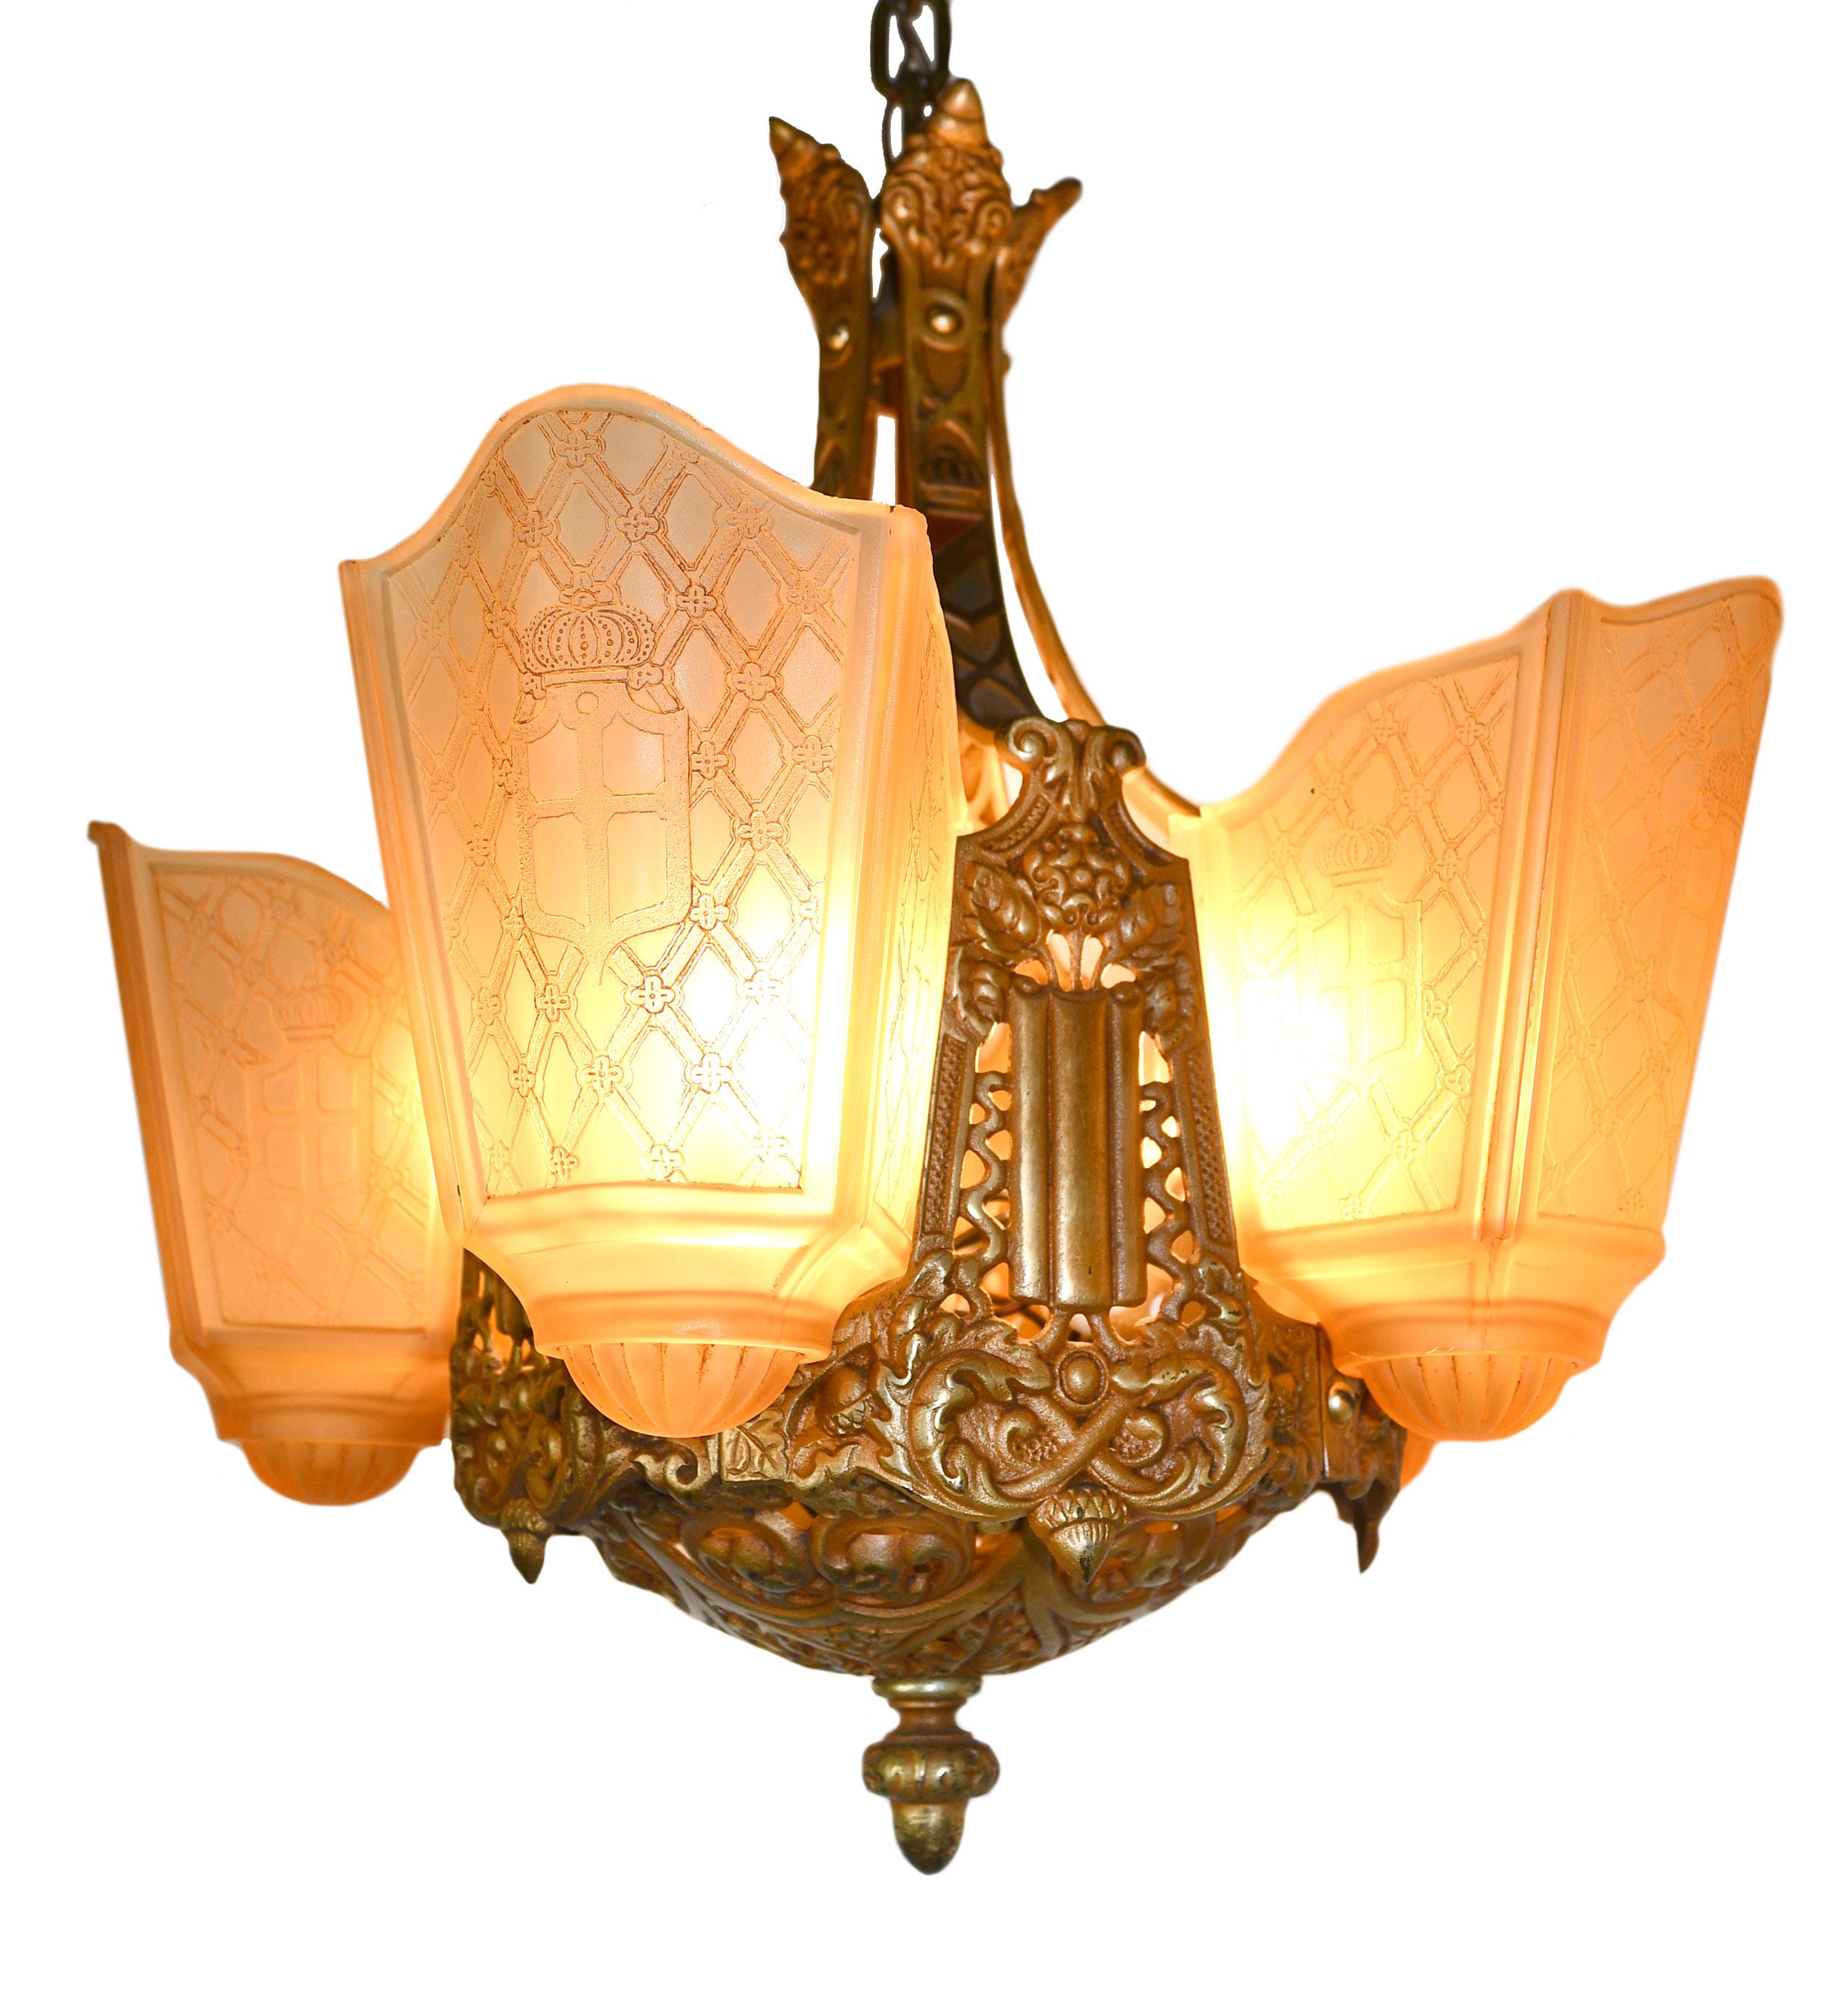 This finely crafted Moe Bridges chandelier features intricate detailing within the cast iron of the body and 5 stunning shades with a shield design. 

Brothers Henrik and Ole Moe founded the Moe Bridges Company in 1919 in Milwaukee, WI, where it